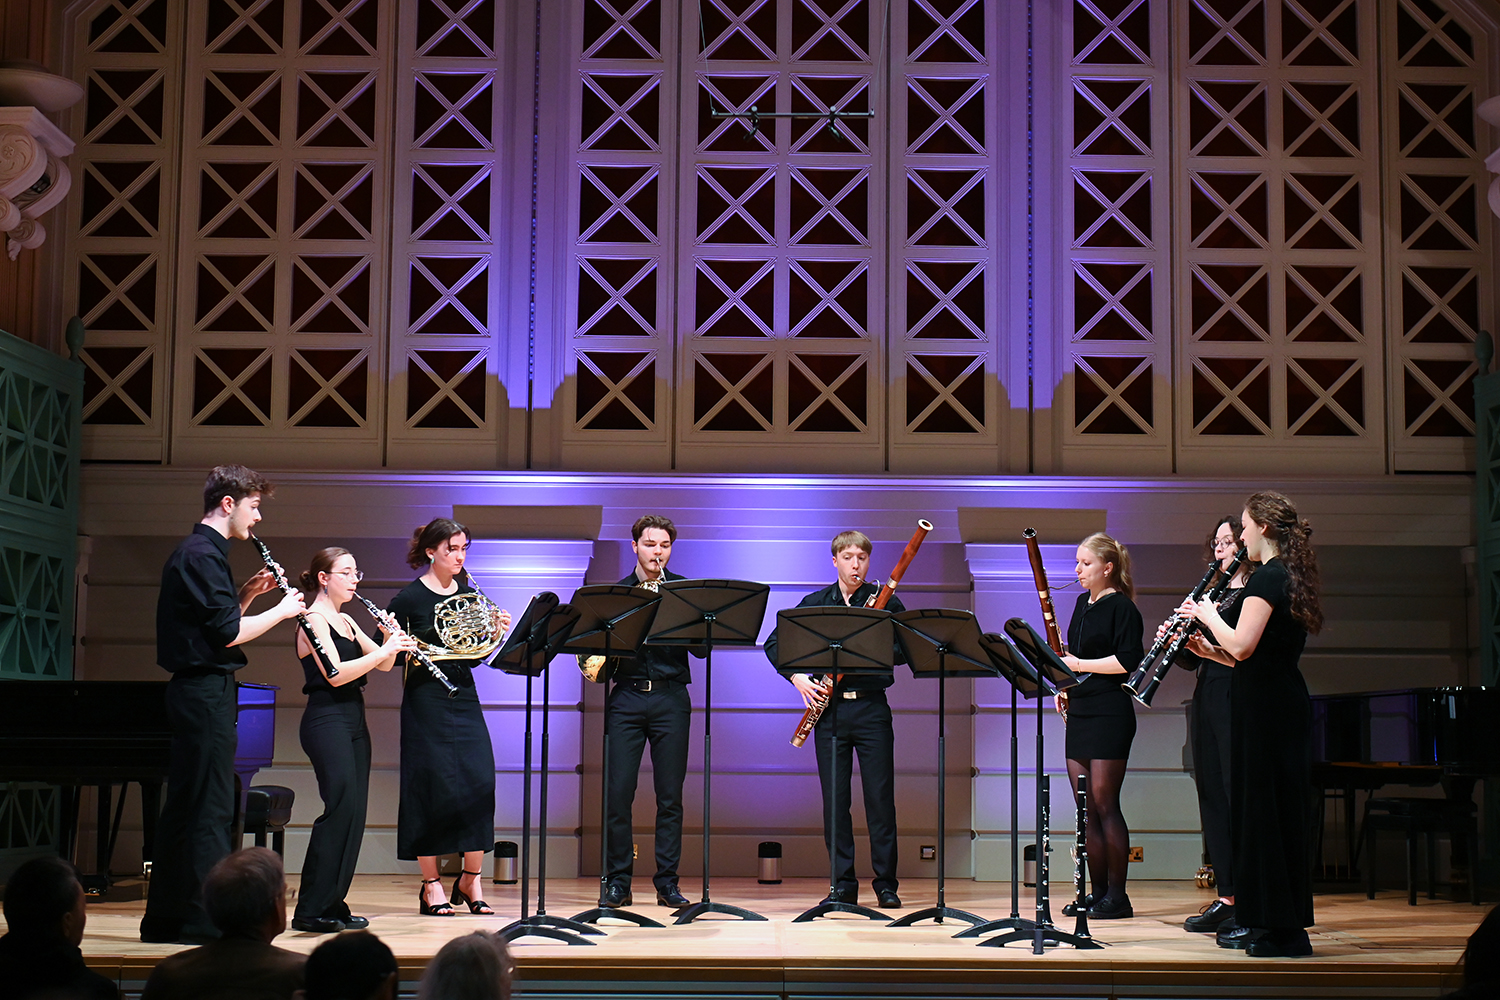 A woodwind chamber group performing in the Performance Hall